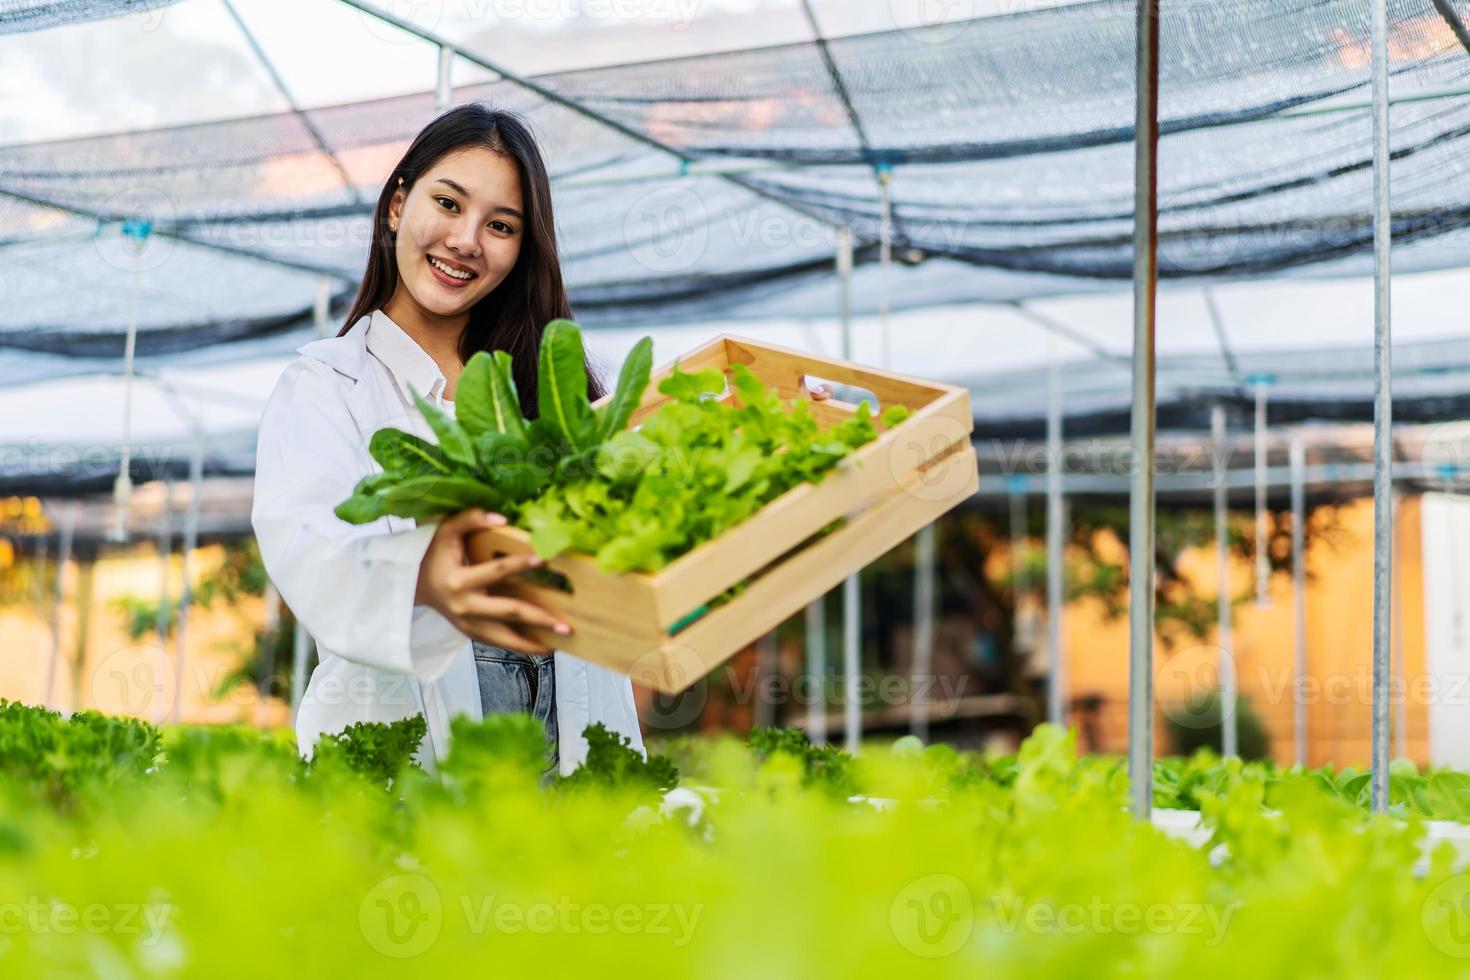 Asian scientist woman holding wooden box with vegetable organic salad from hydroponics while working inside large  farm, resulting in organic vegetables that the market needs. photo